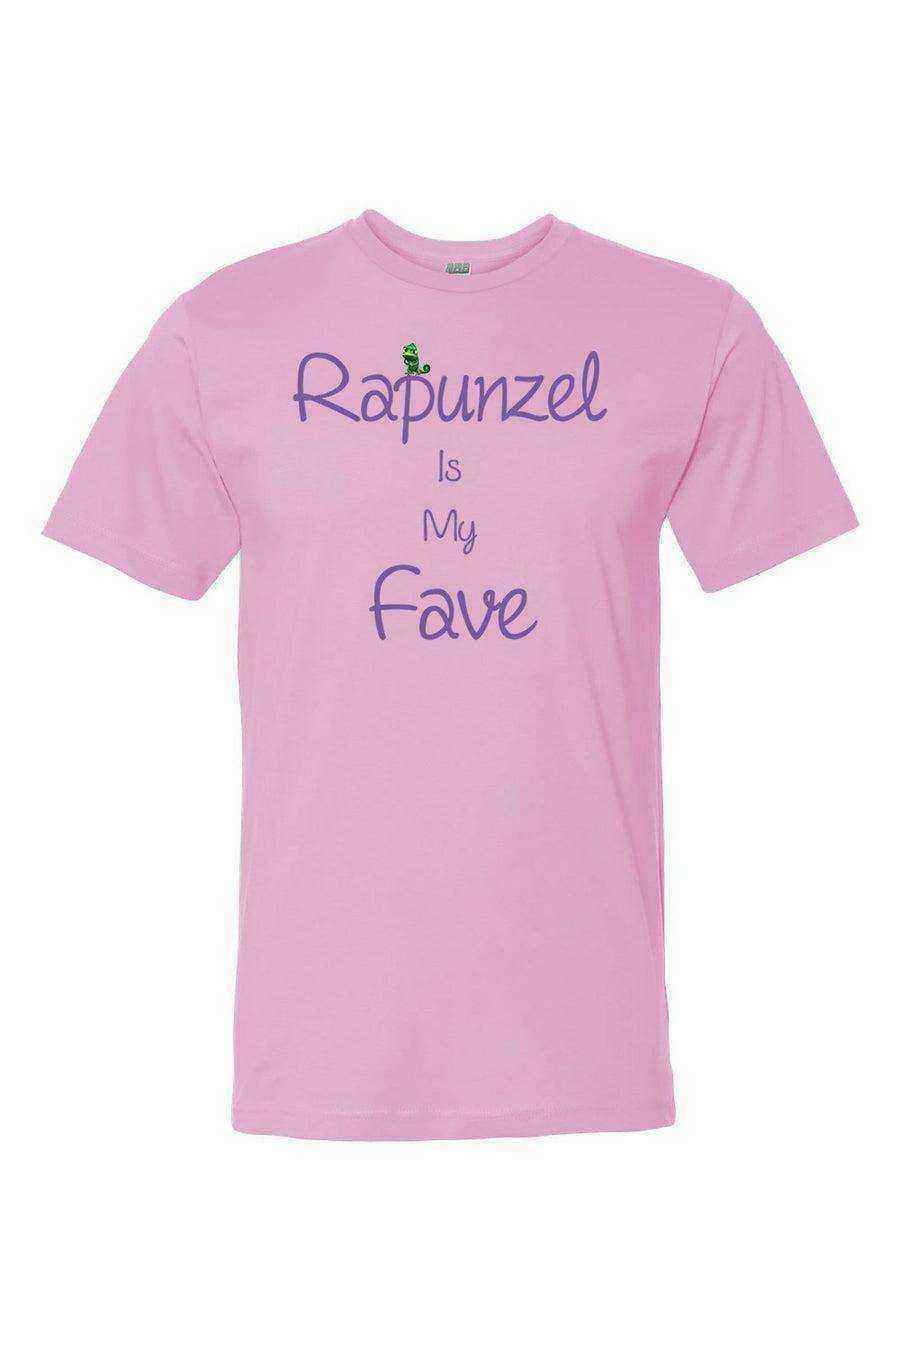 Womens | Rapunzel is my Fave Shirt - Dylan's Tees